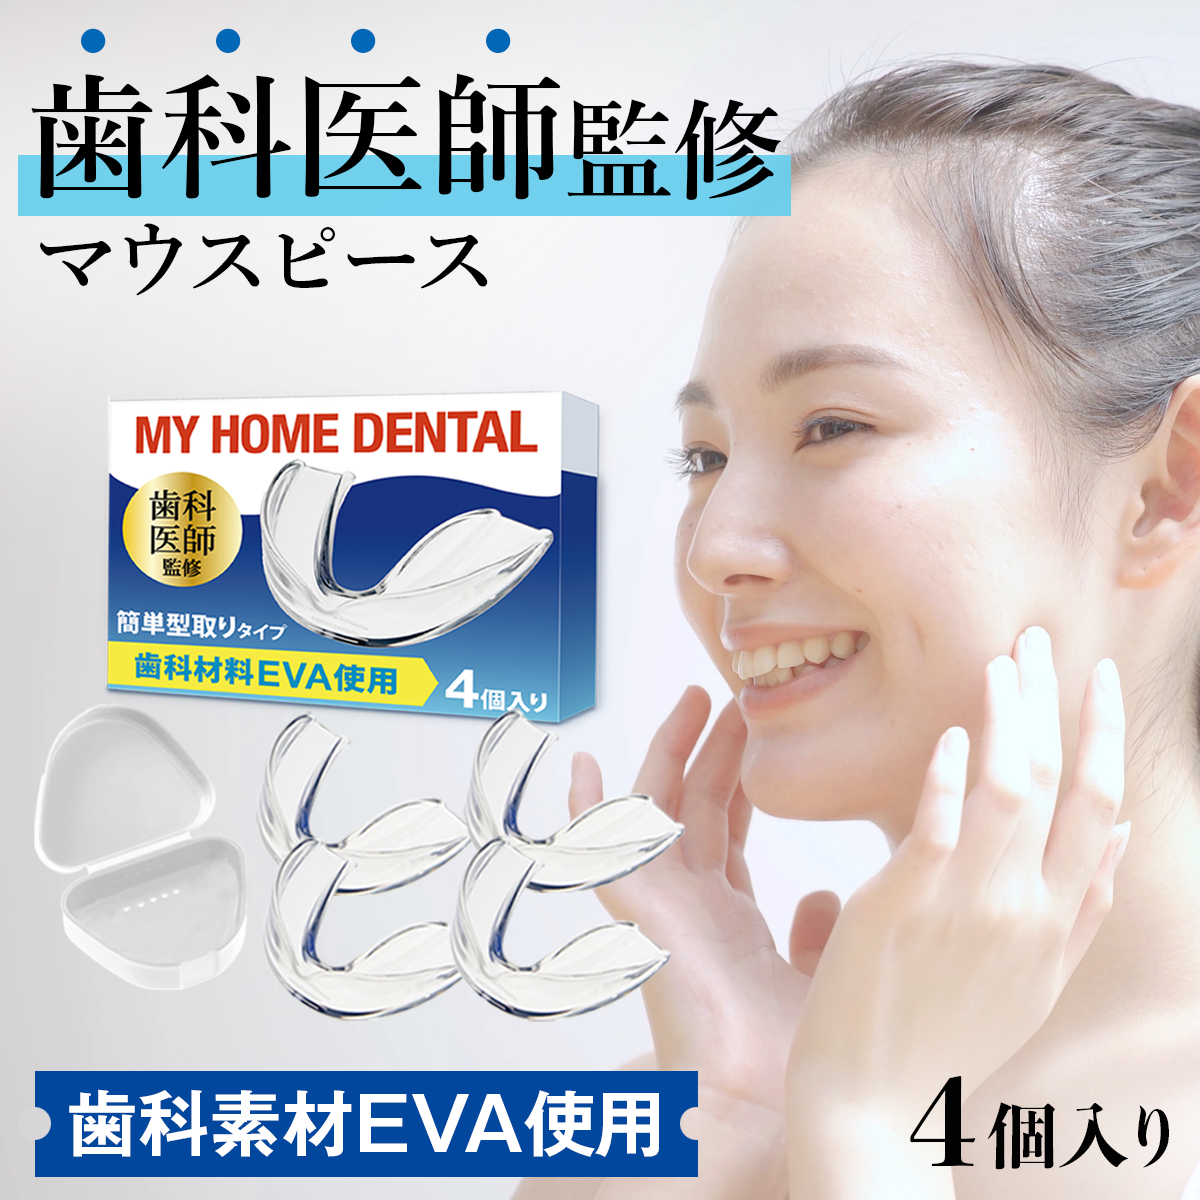  tooth ..... mouthpiece type taking . type 4 piece entering anti-bacterial case attaching tooth ... meal .... prevention goods tooth ... prevention measures goods tooth ... guard tooth ..